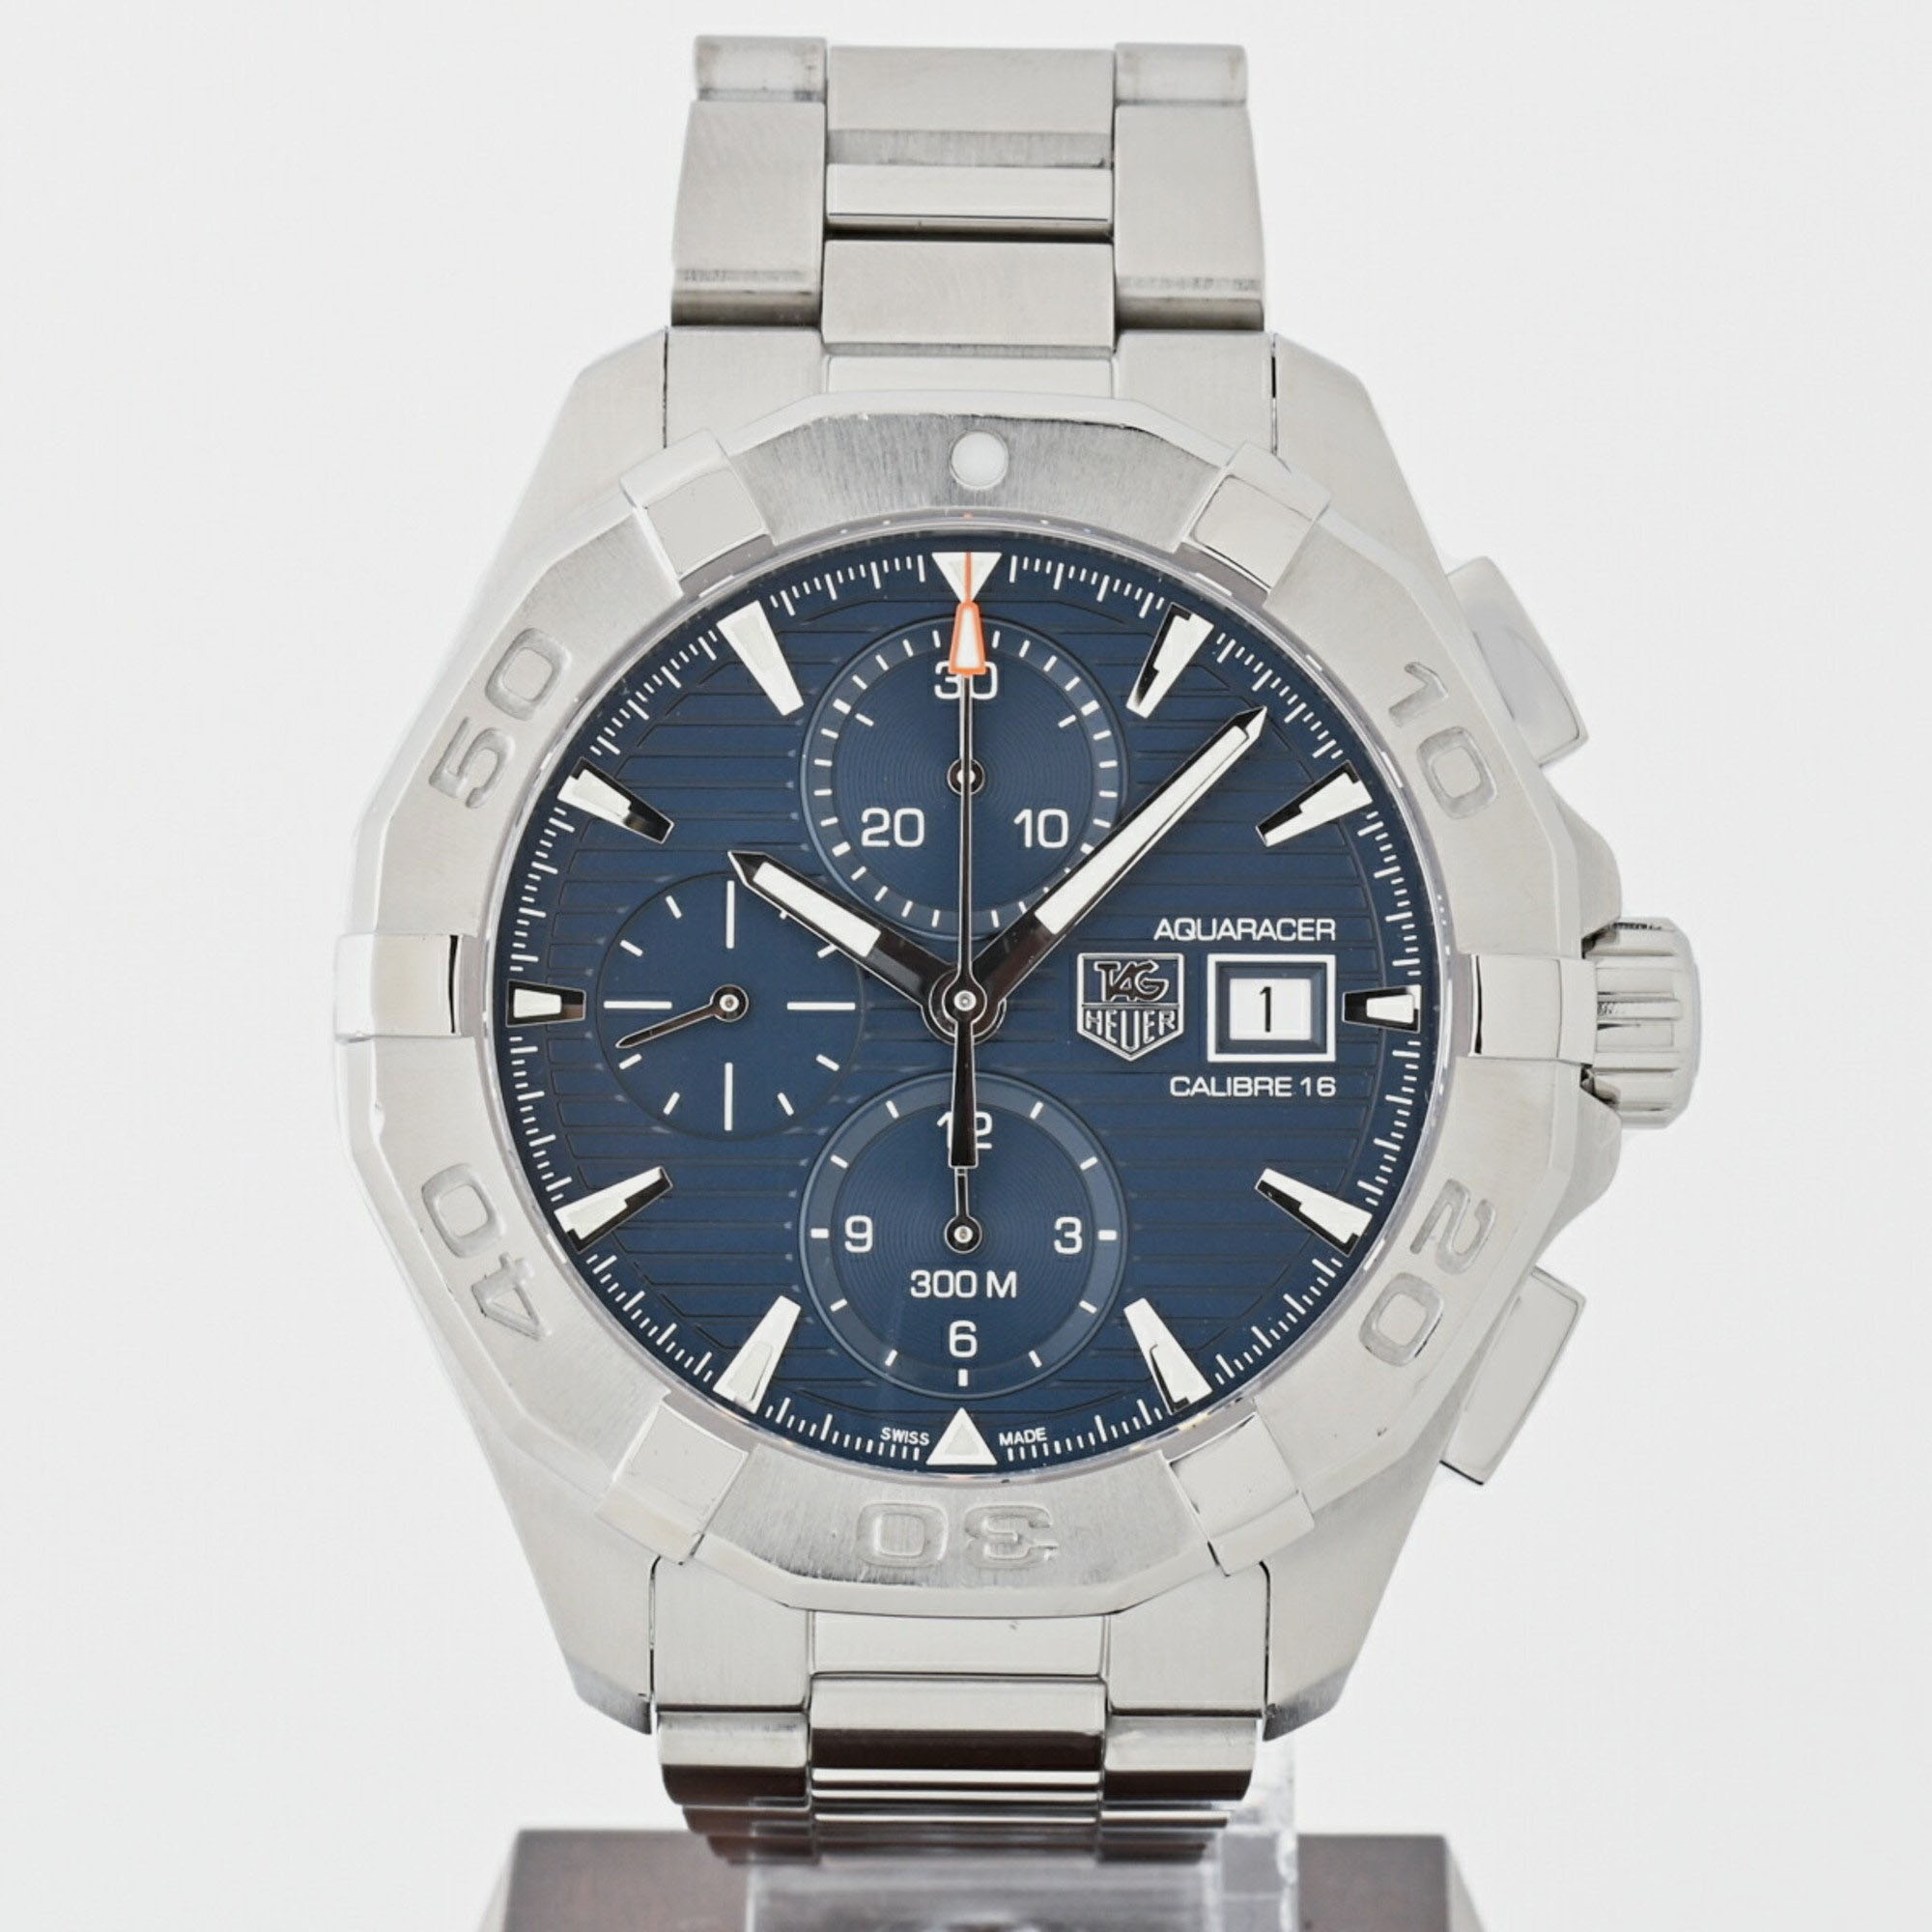 

Tag Heuer Blue Stainless Steel Aquaracer CAY2112.BA0927 Automatic Men's Wristwatch 43 mm